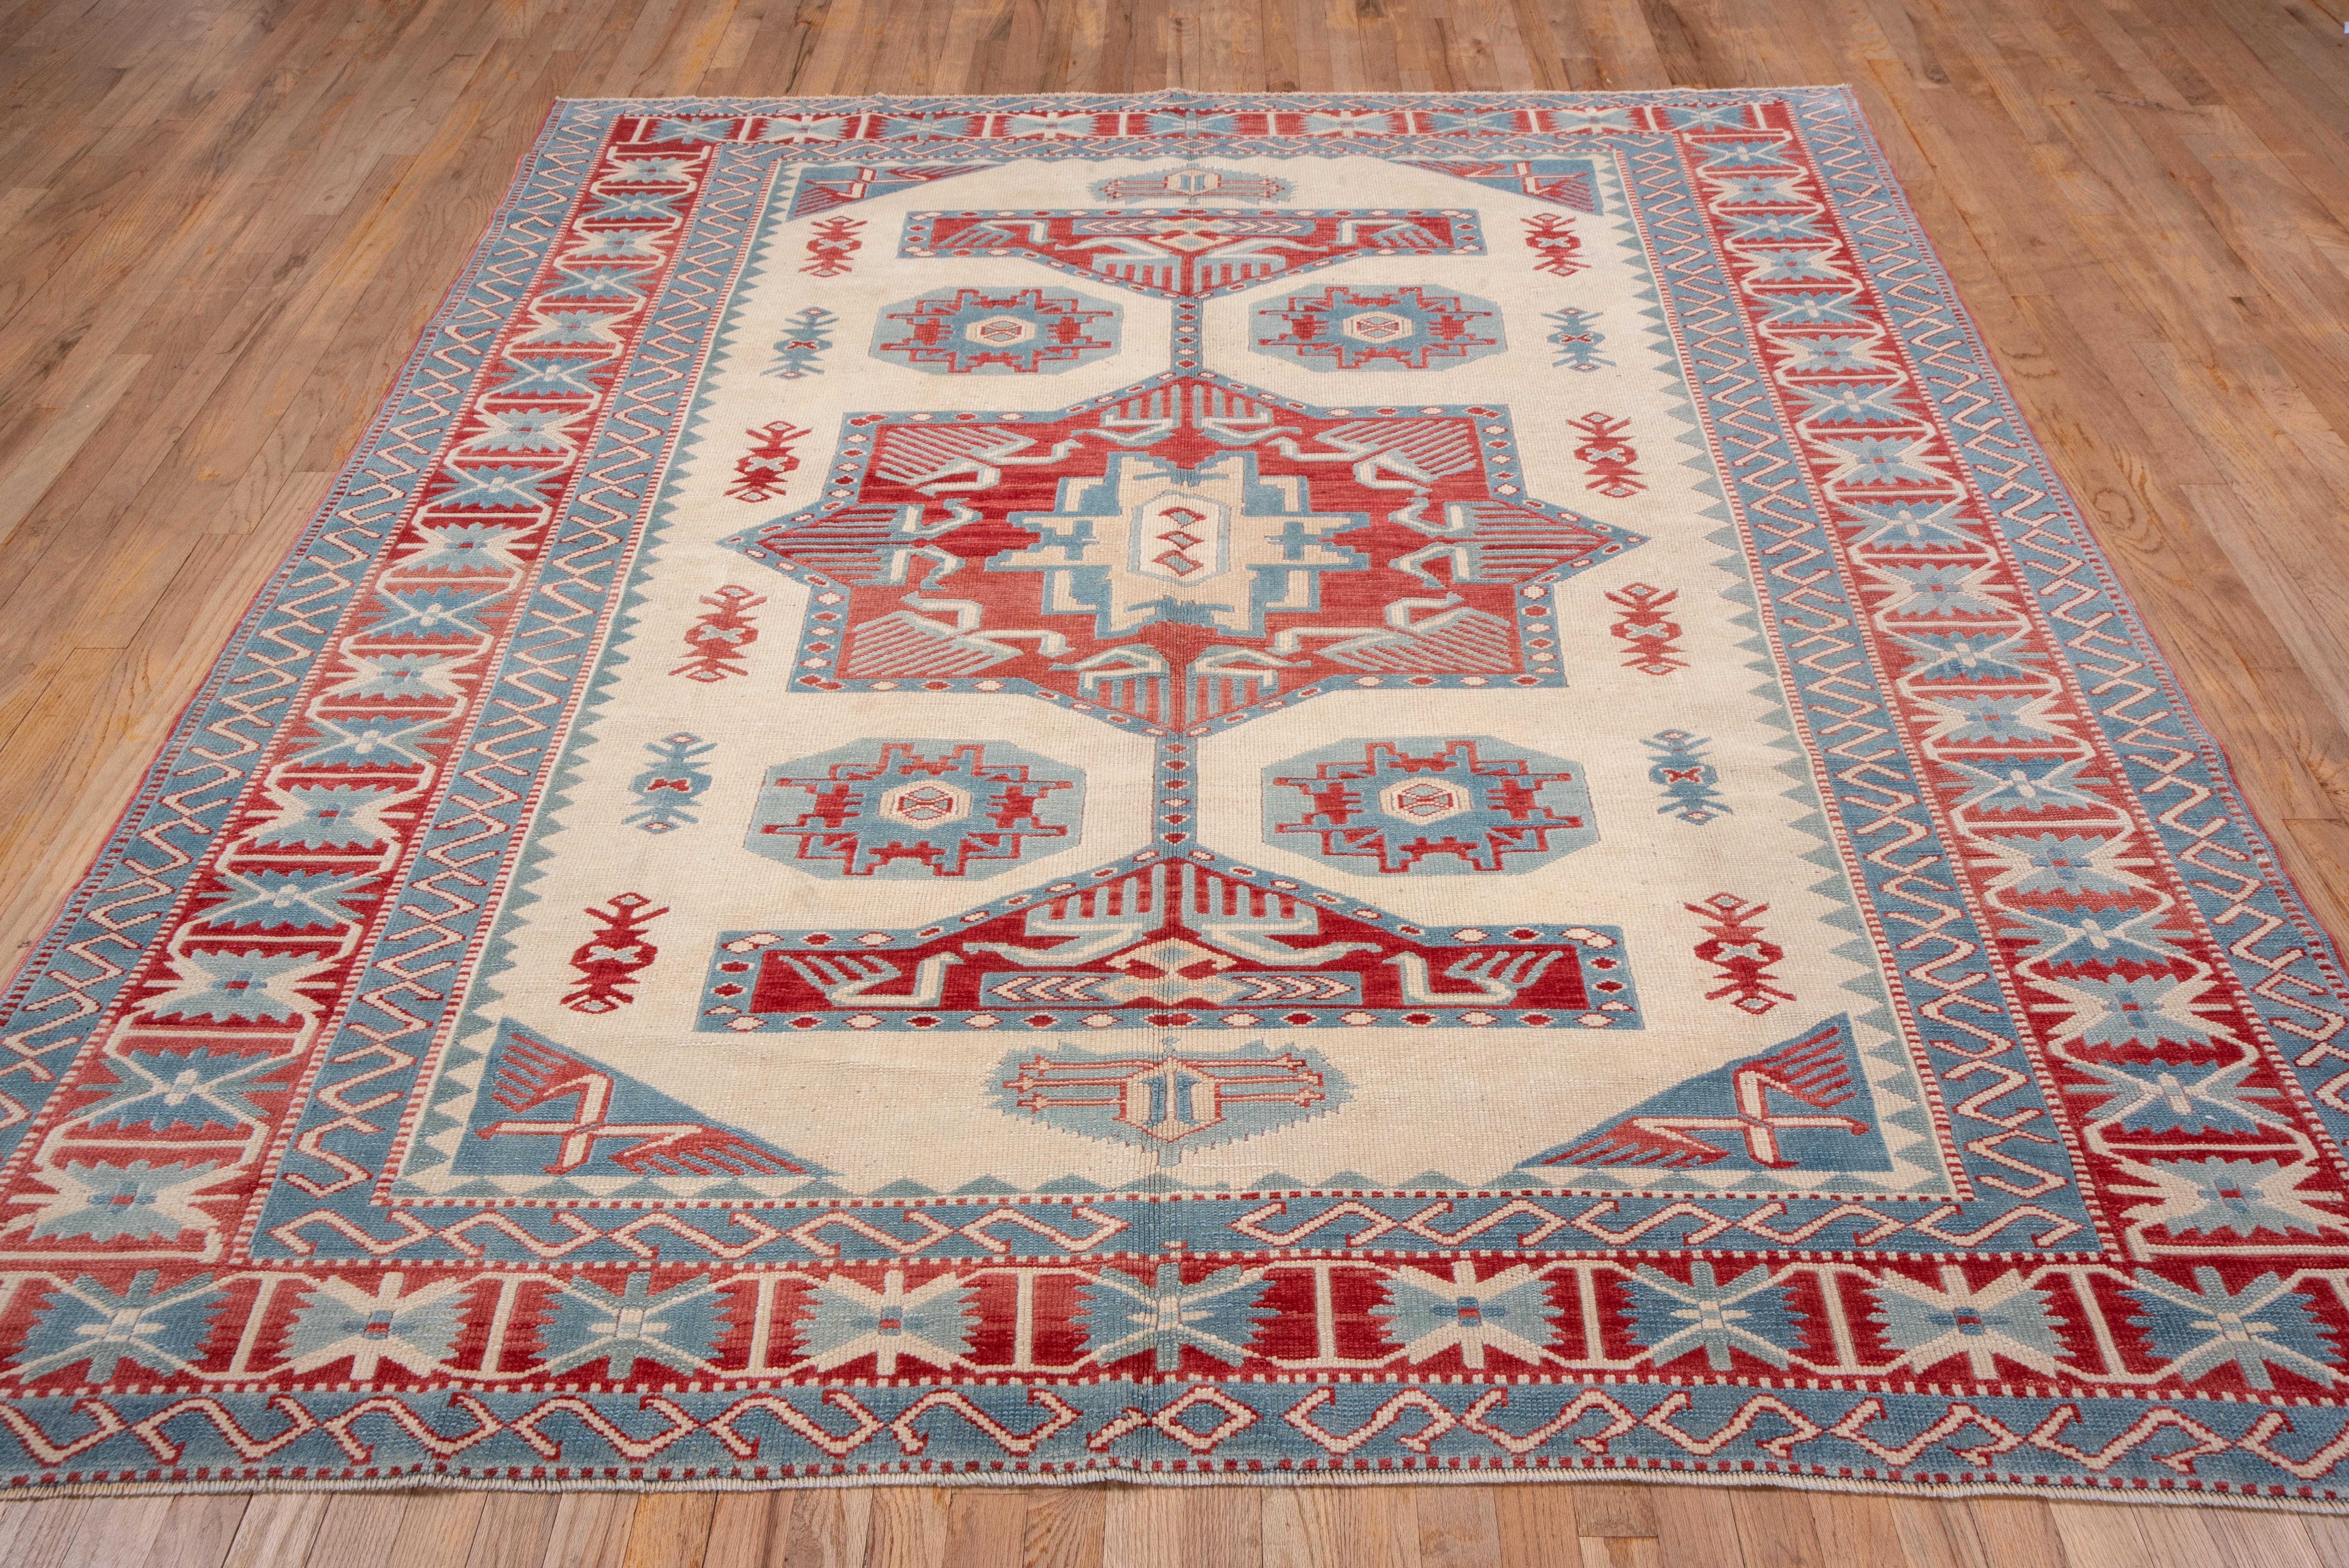 Vintage Turkish Oushak rugs,are a type of traditional handwoven carpet that originates from the Oushak region in western Turkey. These rugs are highly regarded for their unique designs, color palettes, and craftsmanship. Here are some key